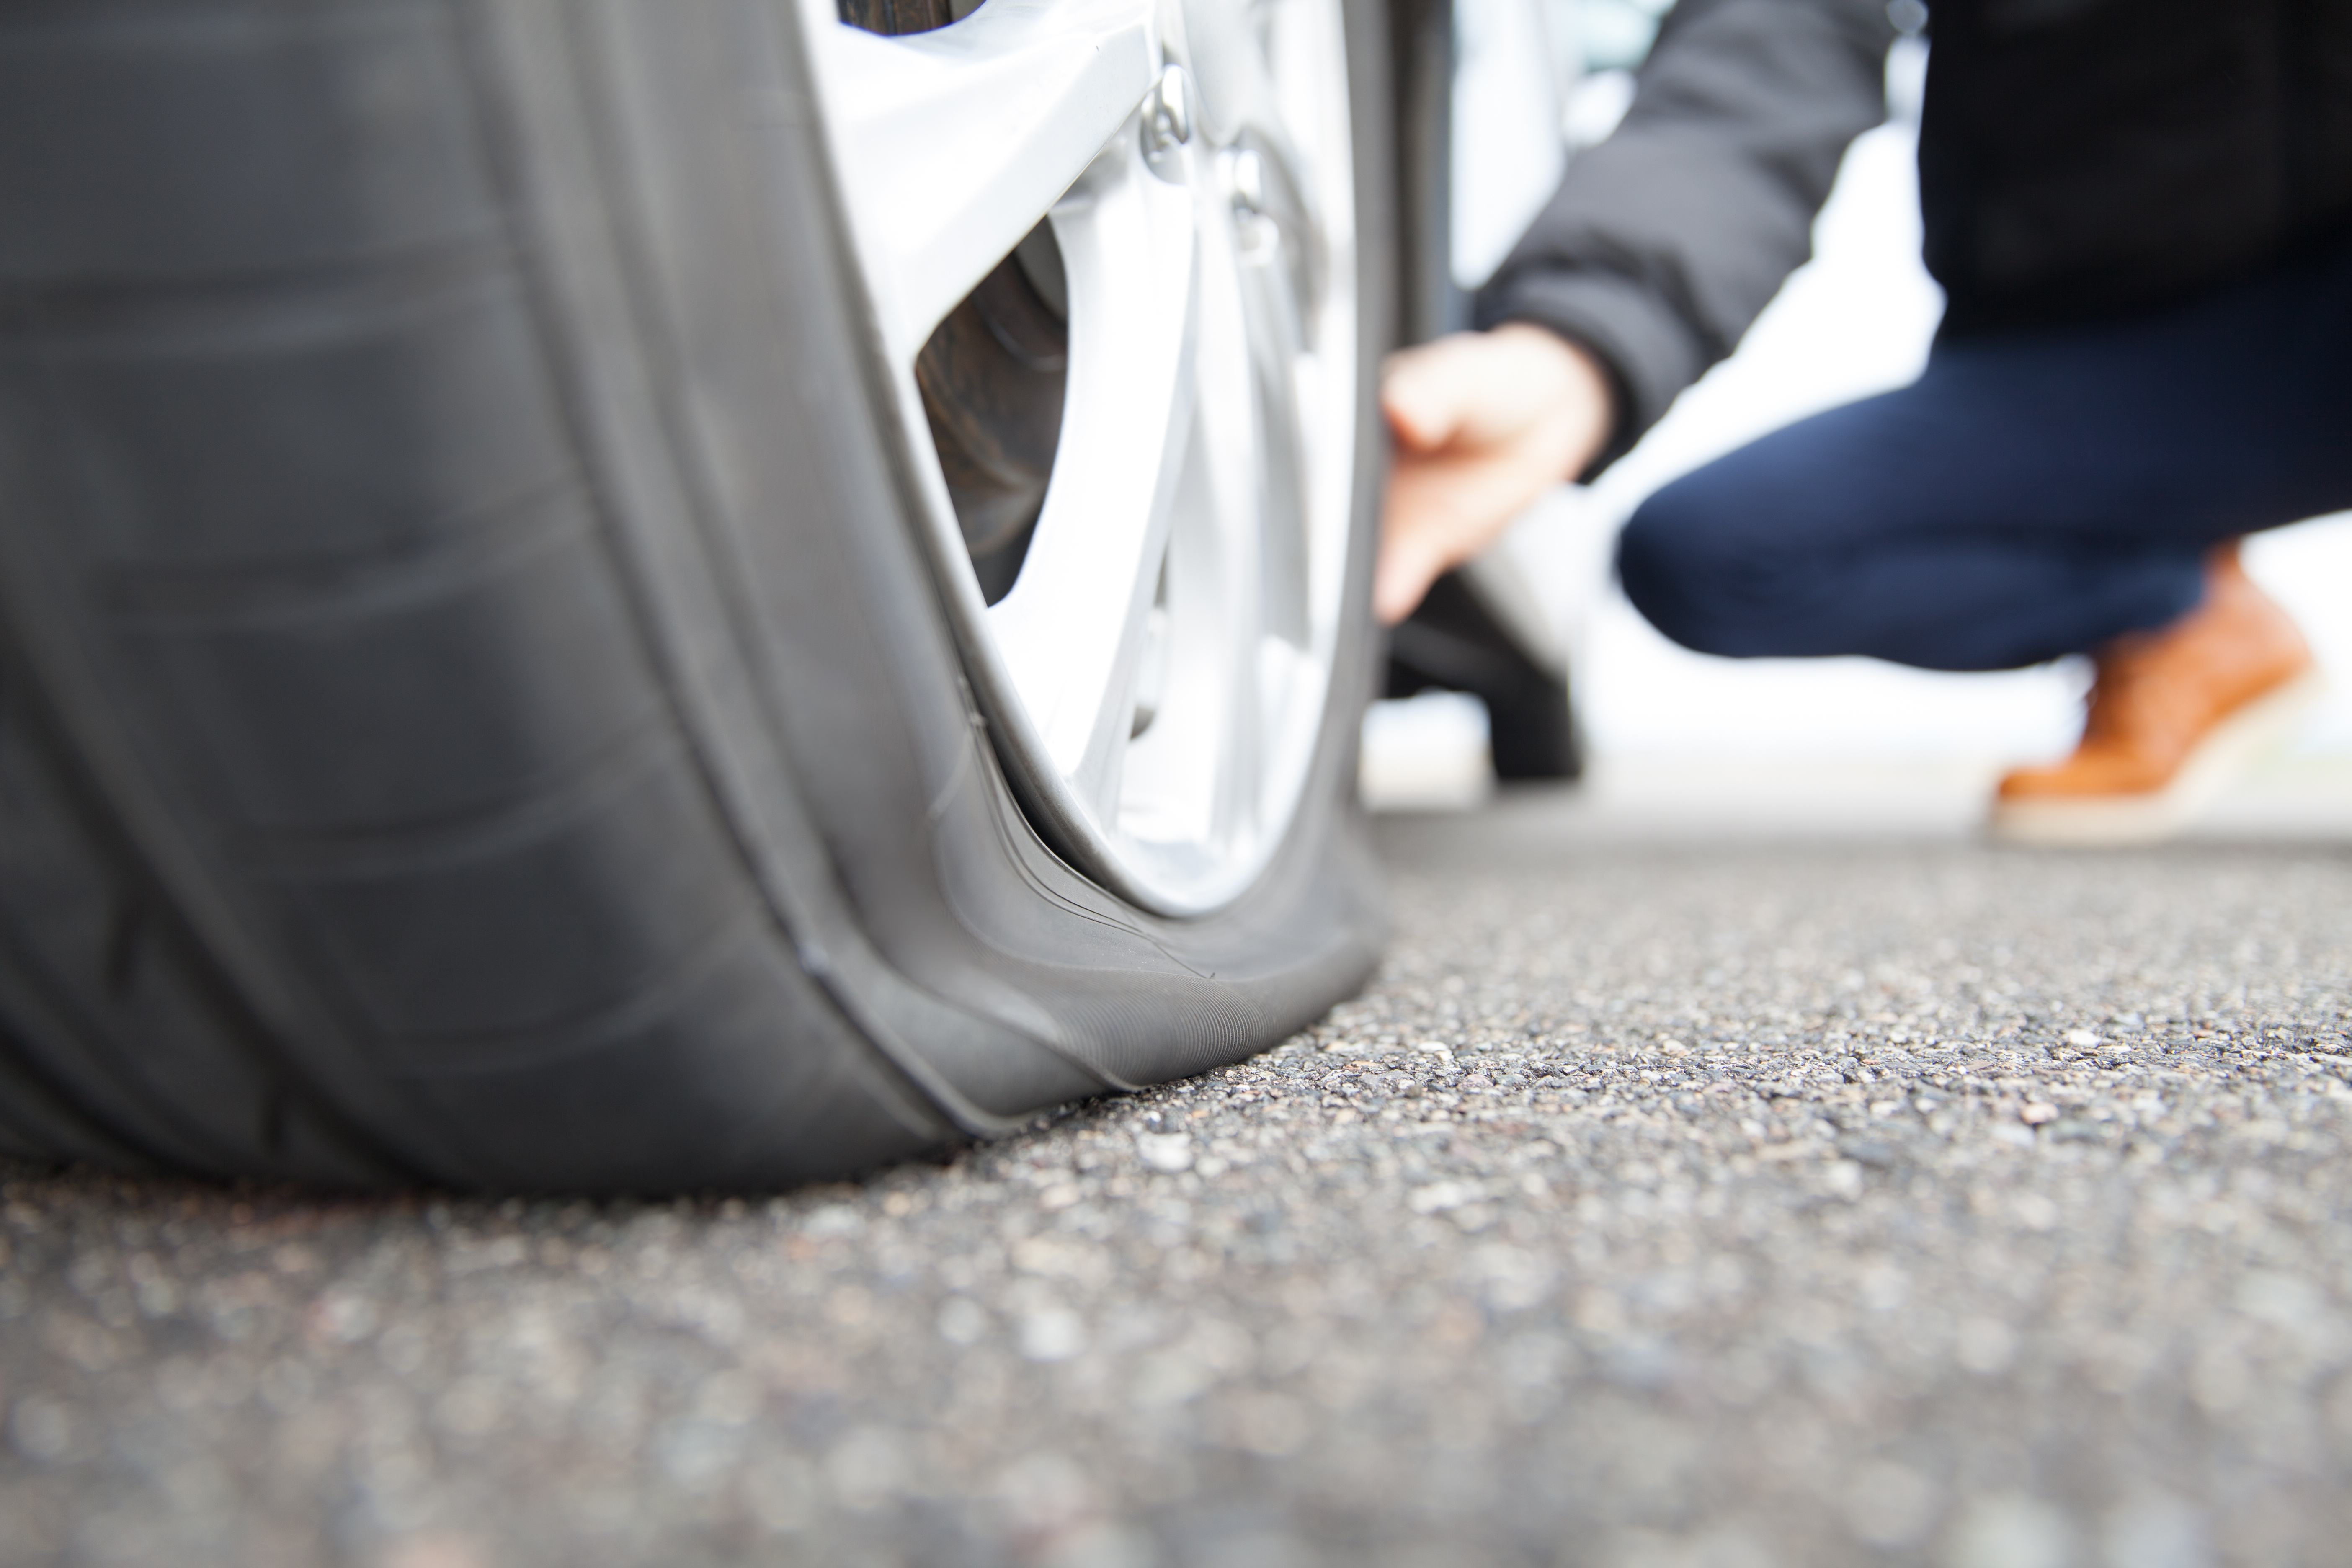 How Much Does it Cost to Fix a Flat Tire on a Car?